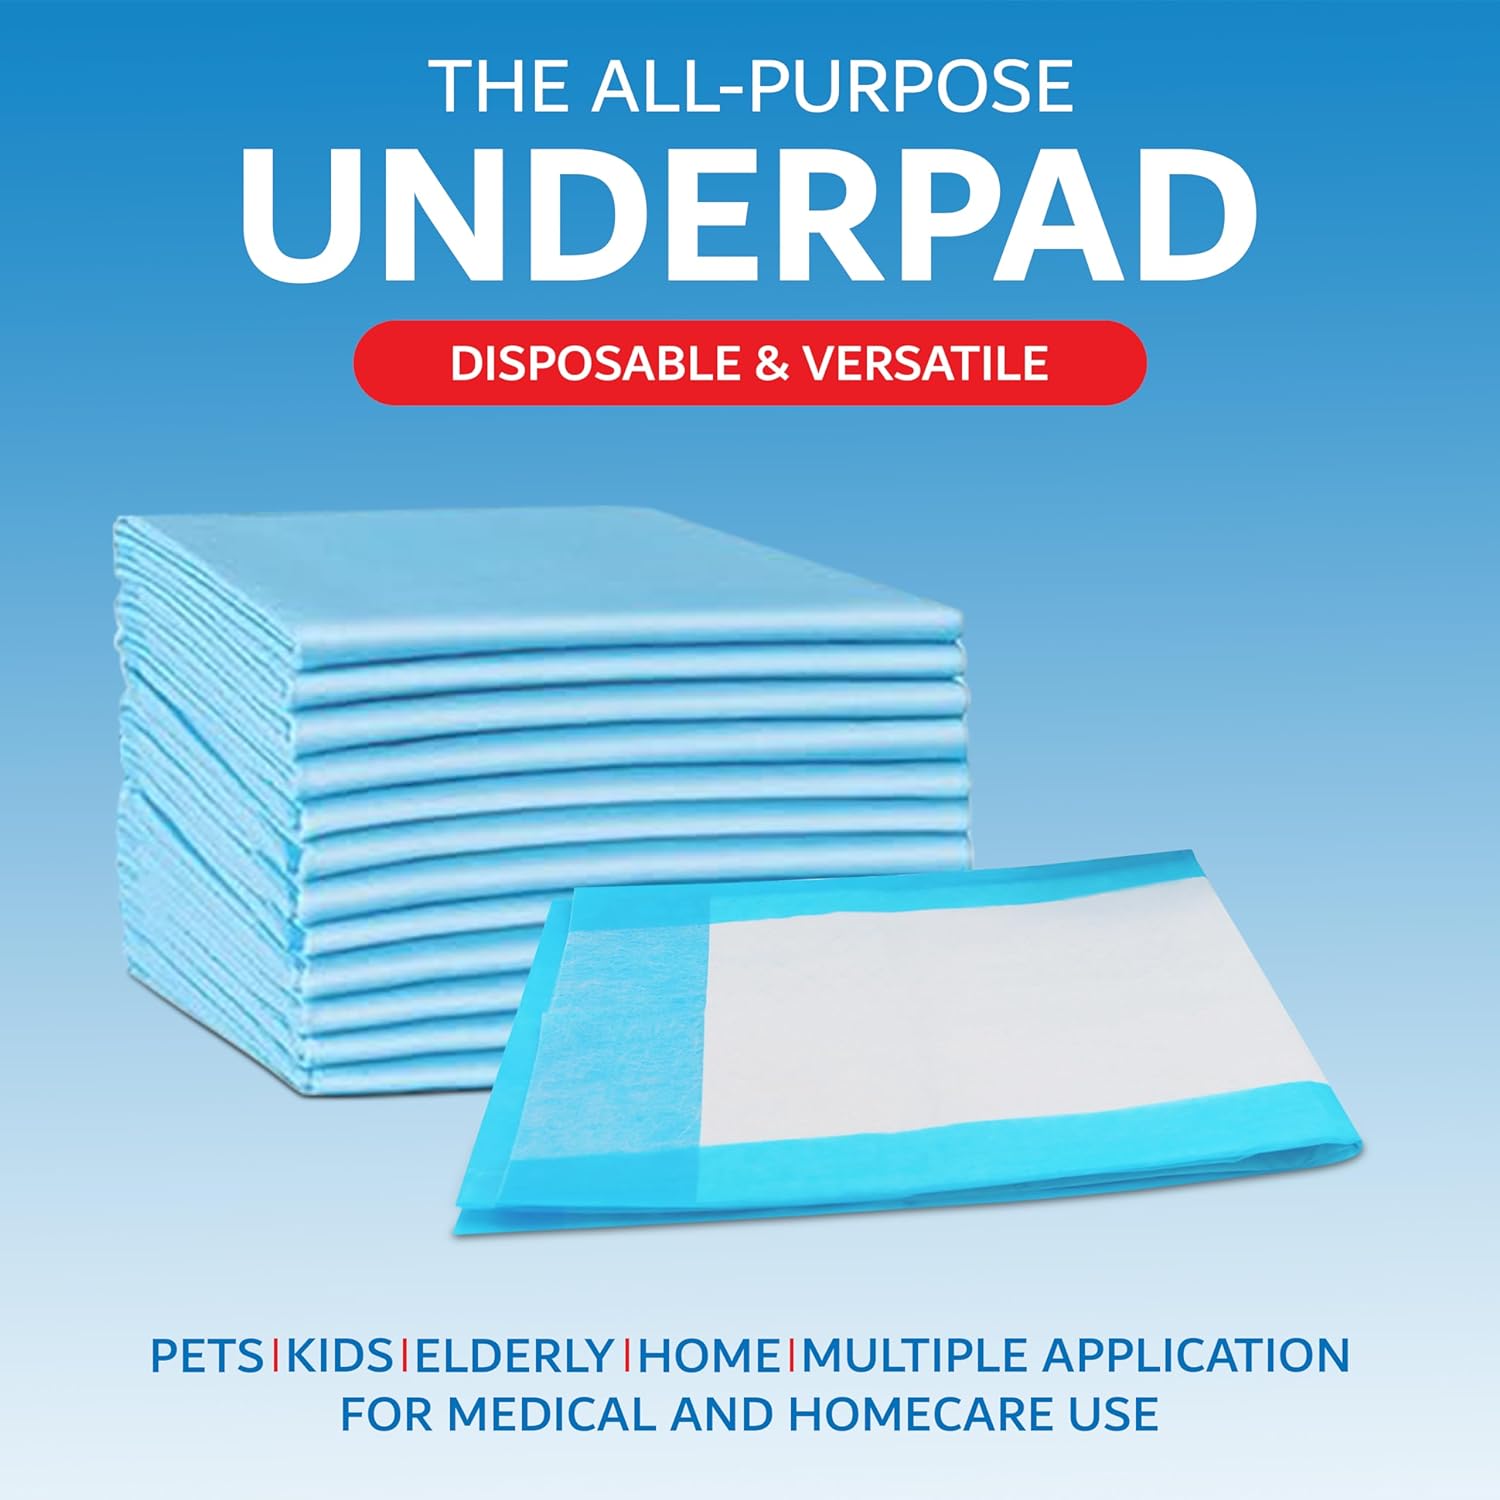 Henry Schein Disposable Underpads 23'' x 24'' Incontinence Pads, Bed Covers, Puppy Training | Thick, Super Absorbent Protection for Kids, Adults, Elderly | Liquid, Urine, Accidents